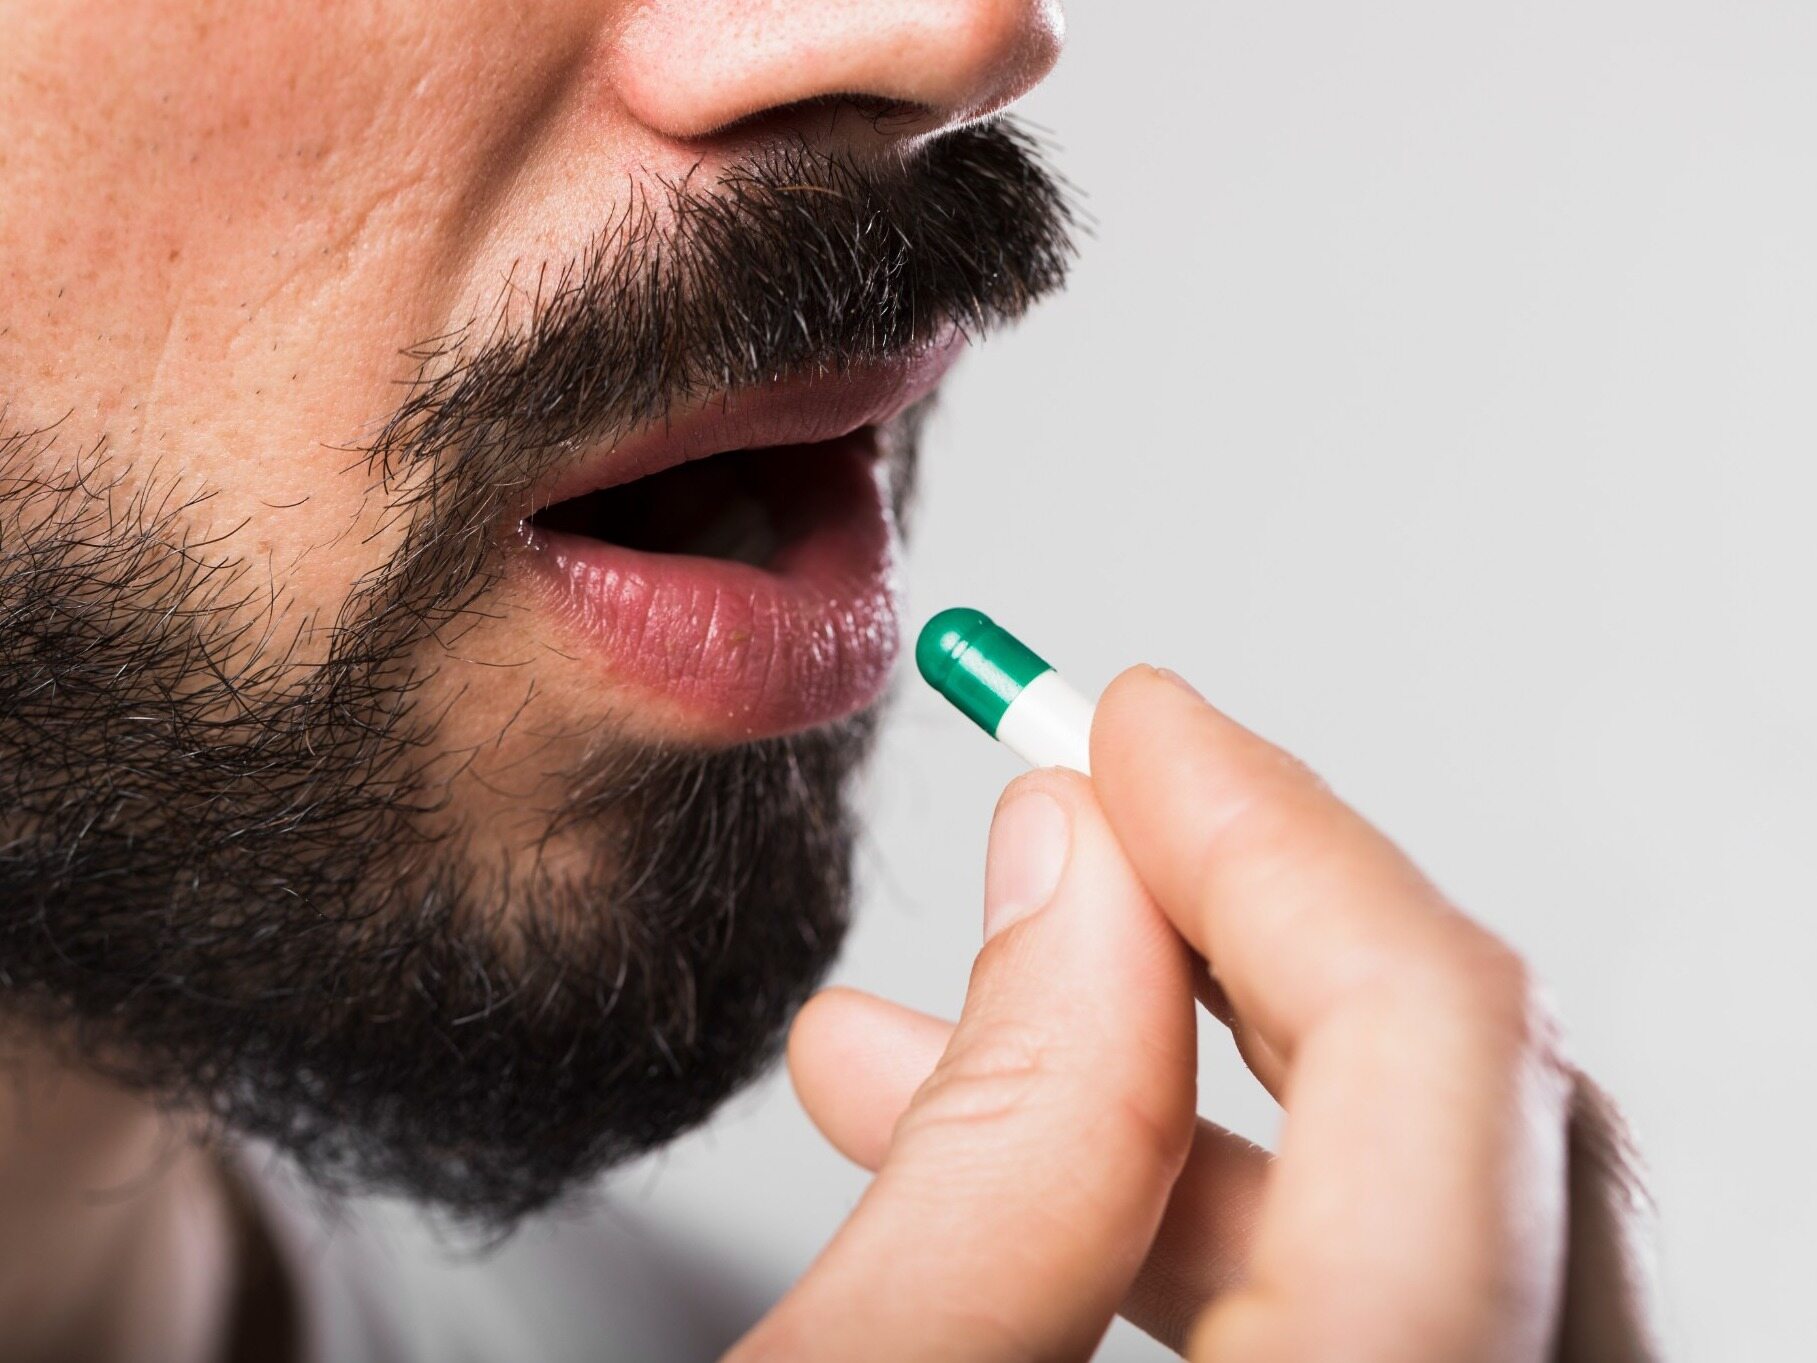 A male contraceptive pill has appeared on the horizon.  Tests are underway